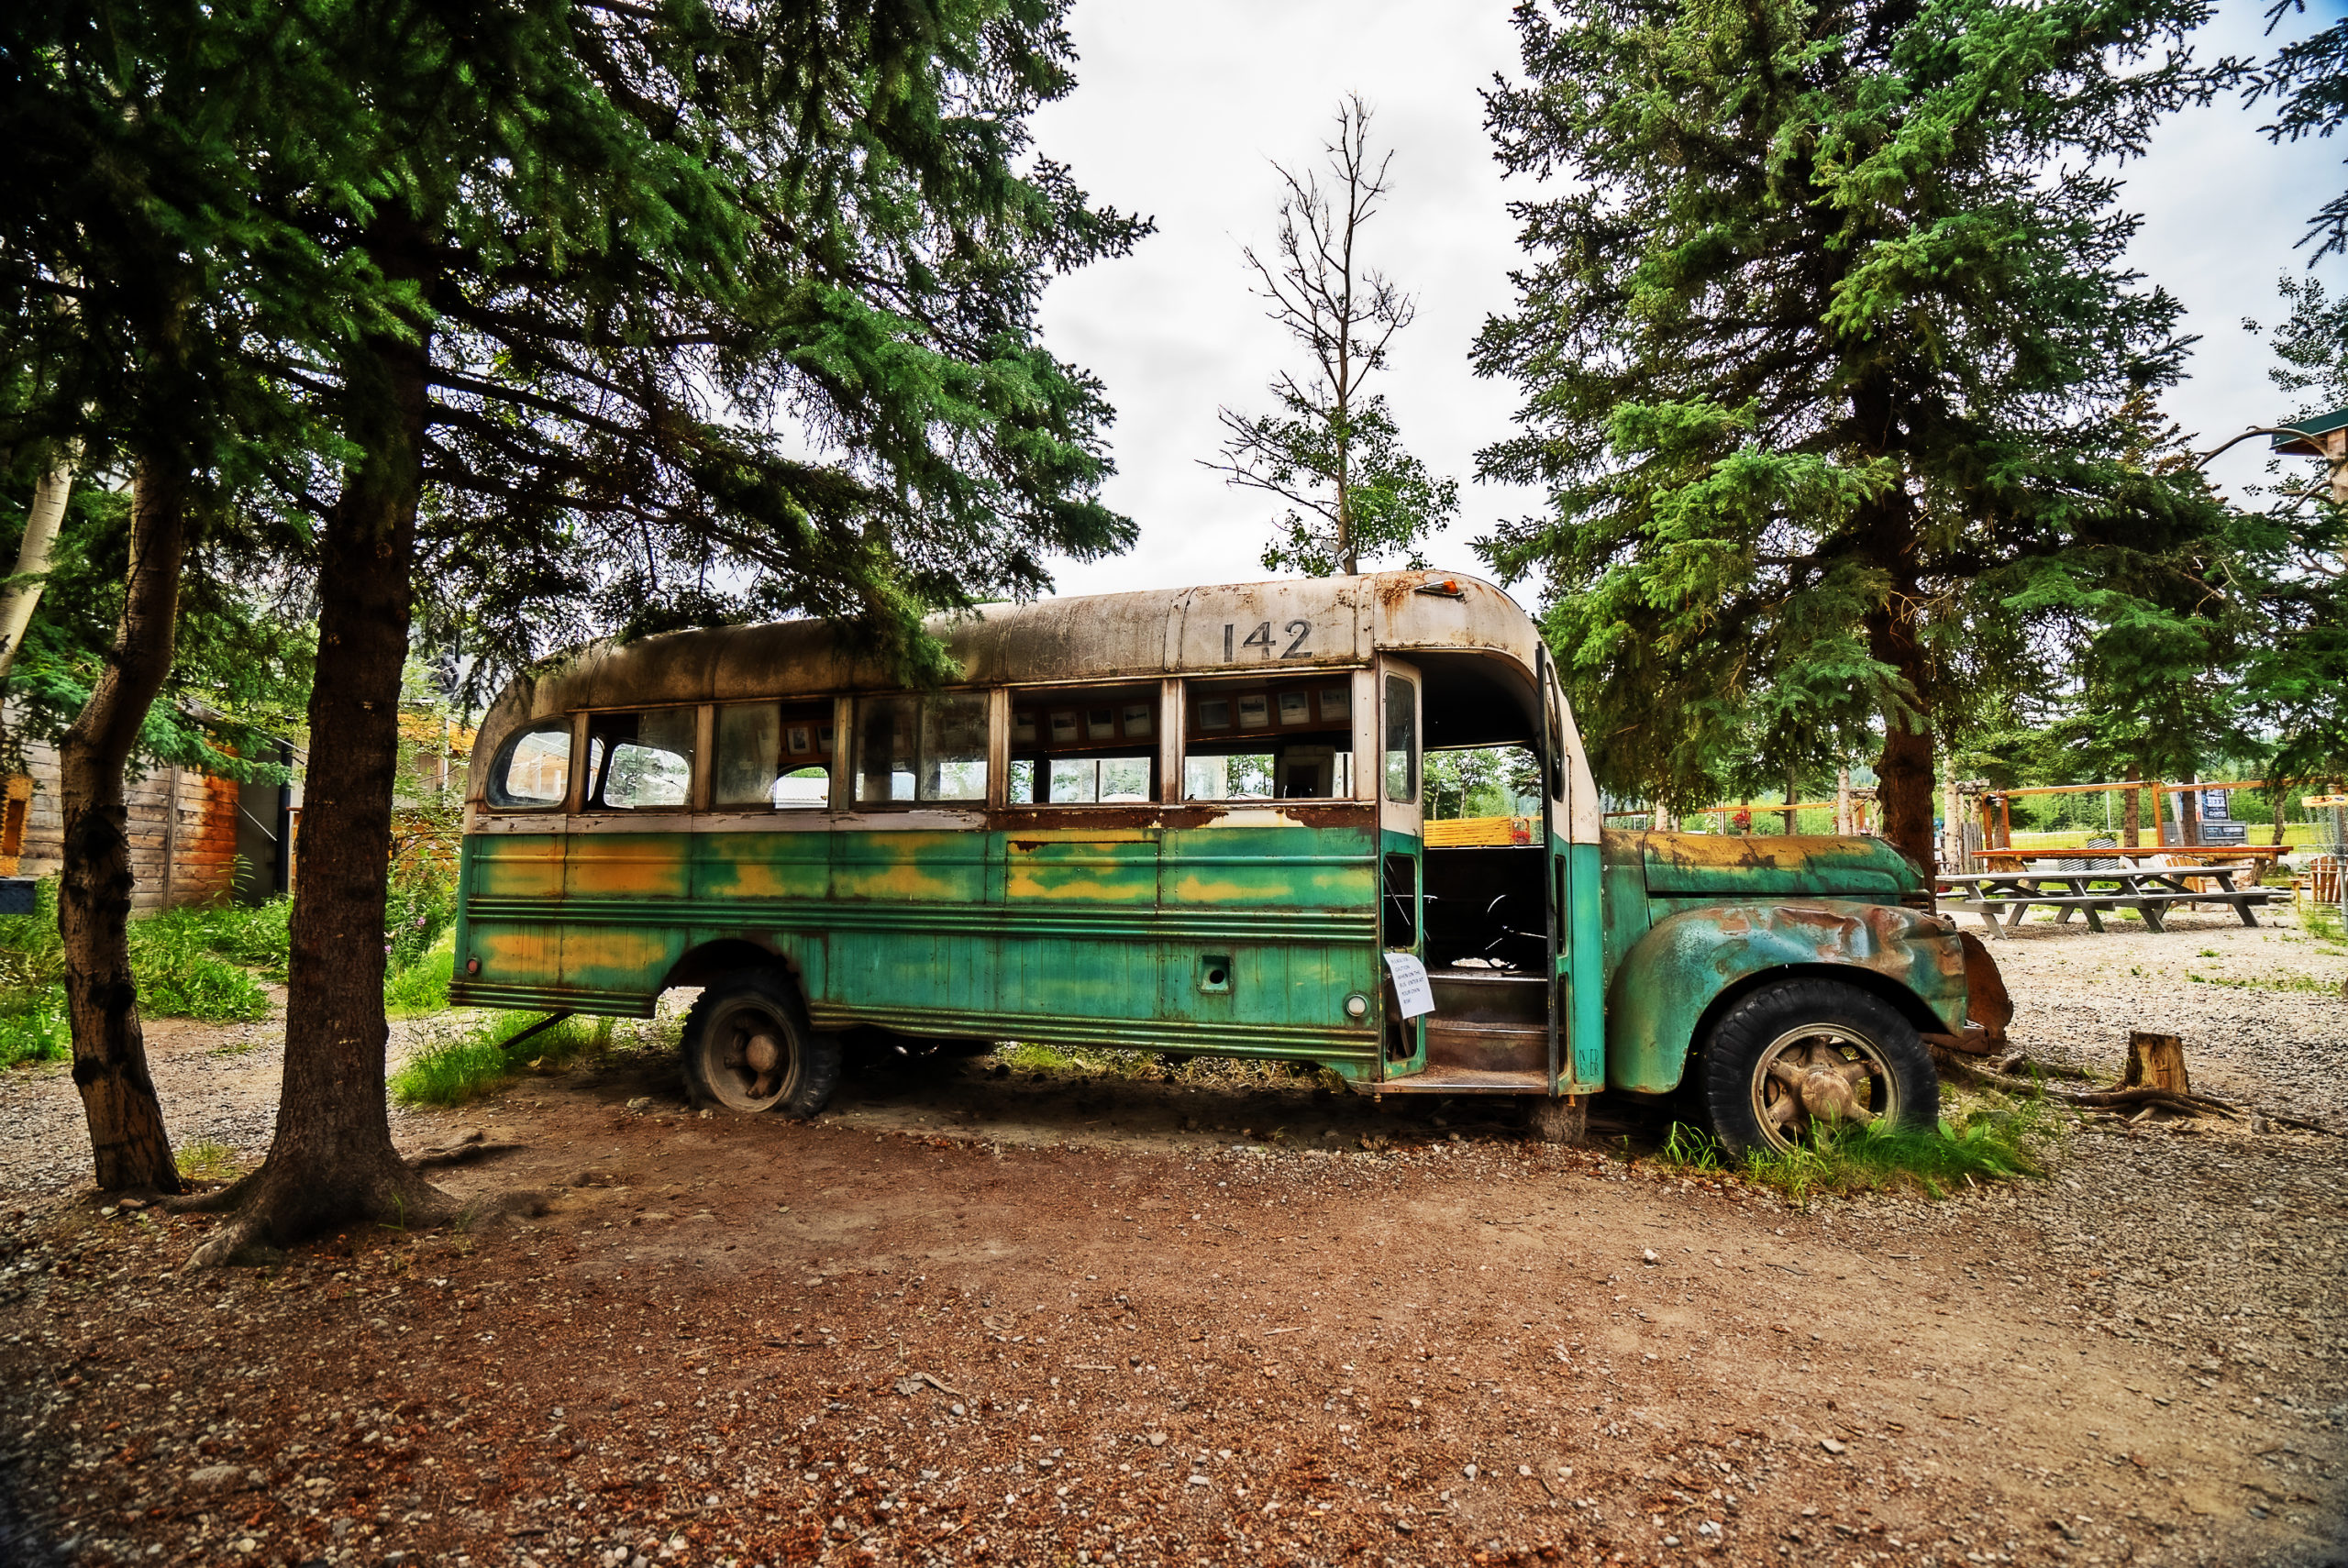 Bus from Into the Wild movie